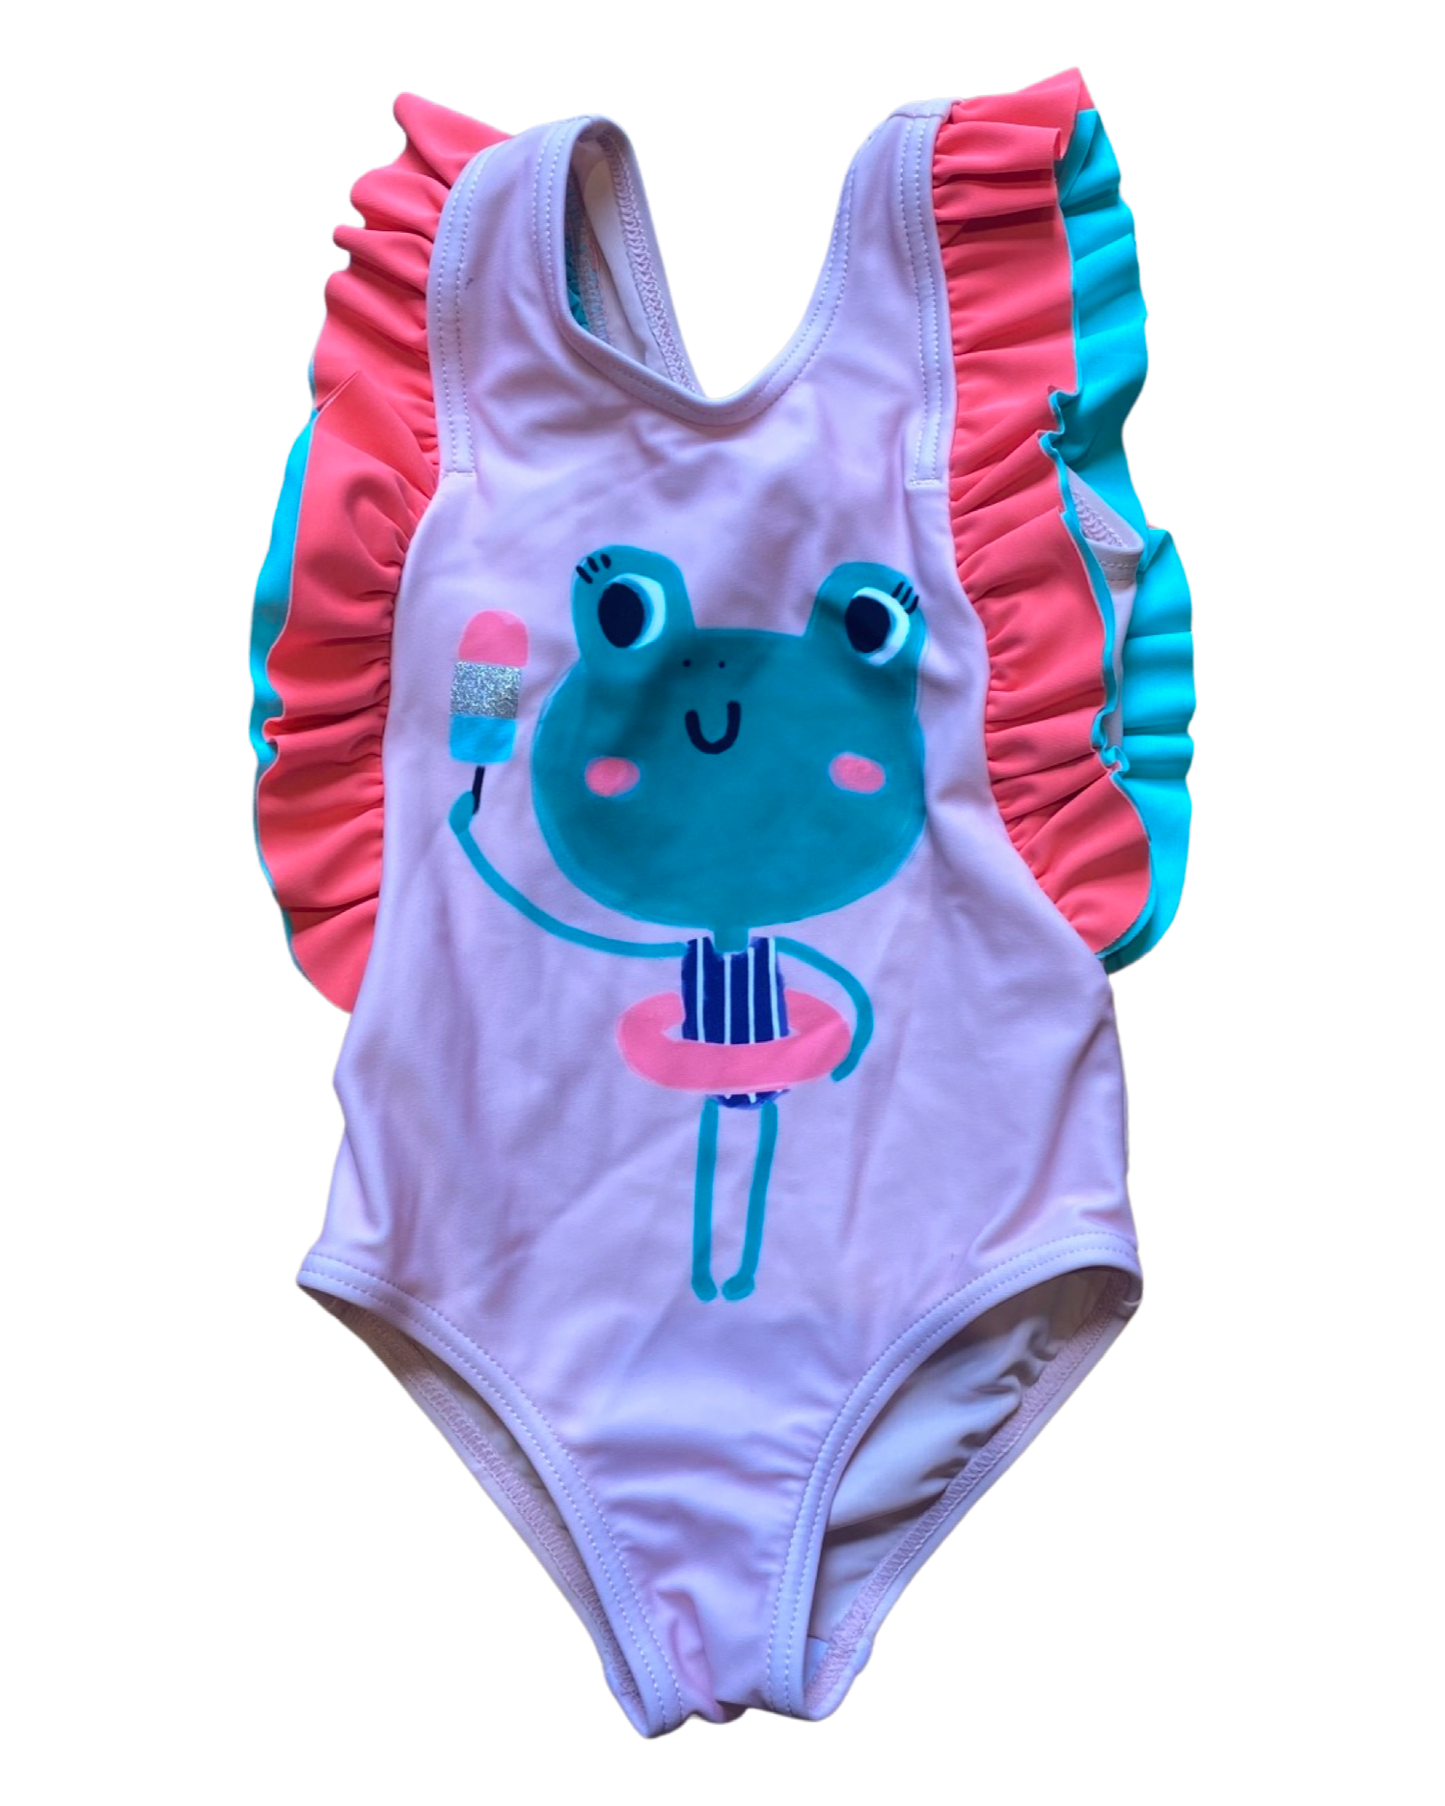 M&S Frog ruffled swimsuit ( size 1.5-2yrs)